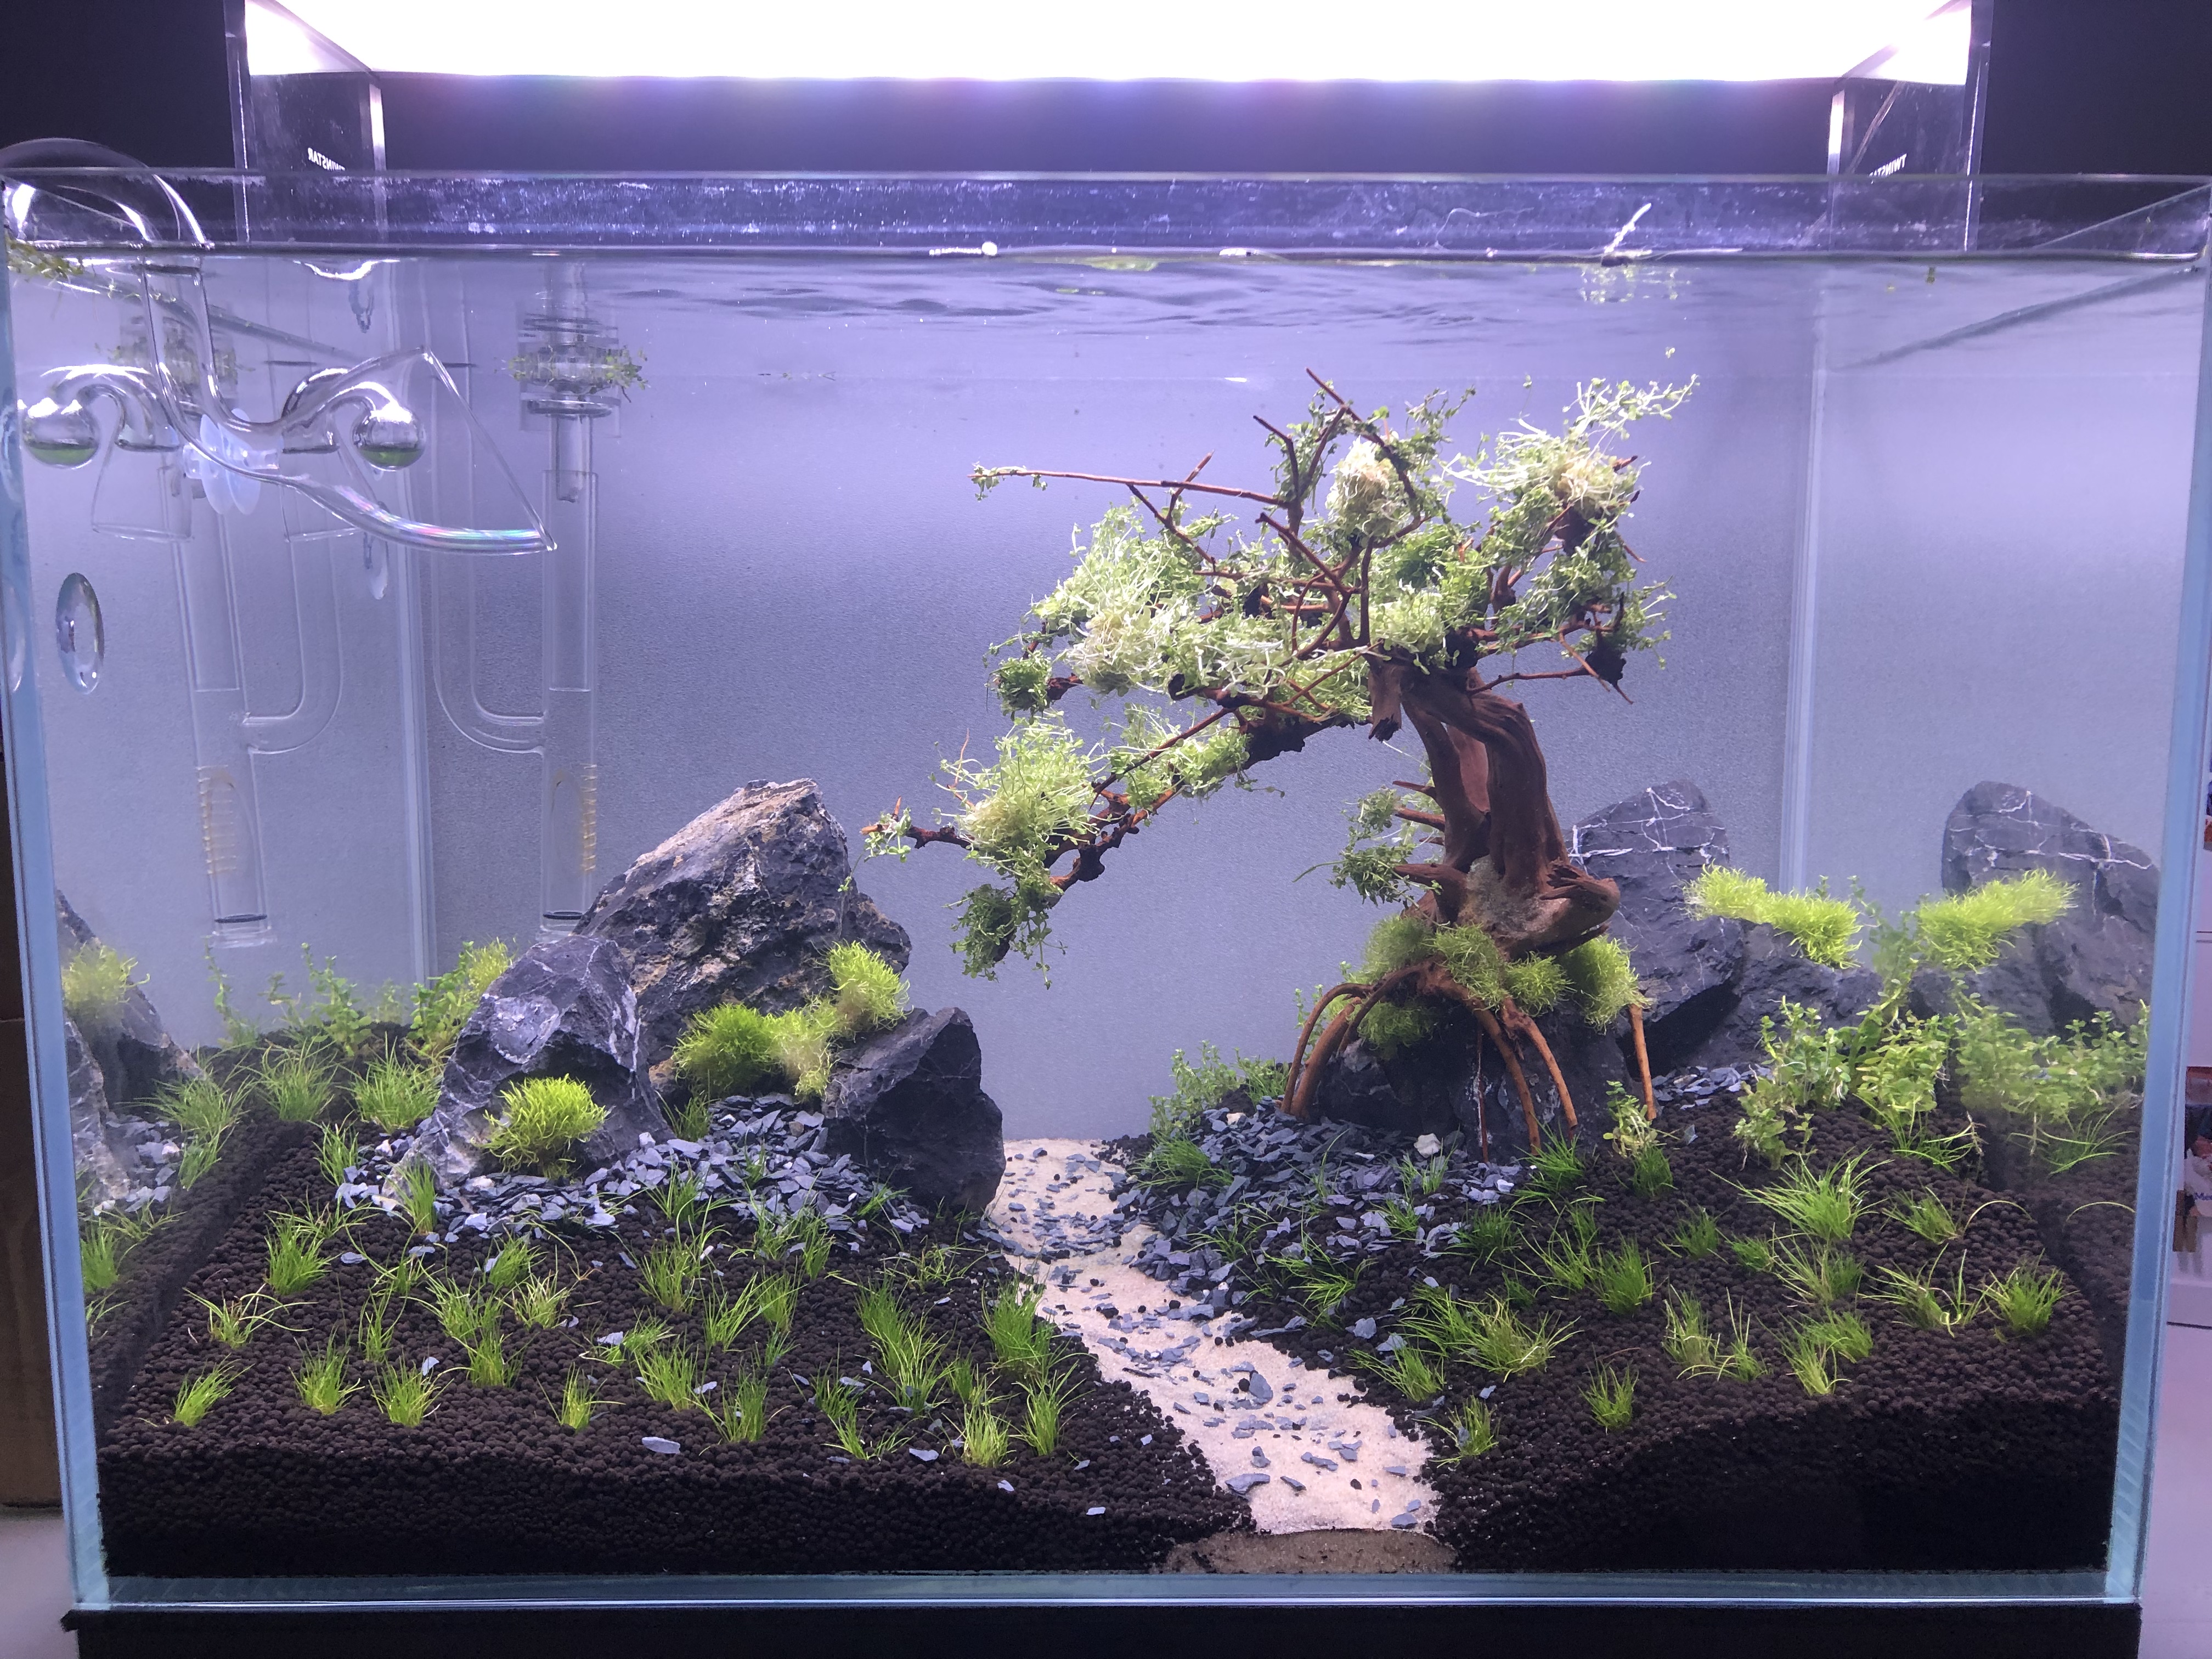 New to this - First Aquascape